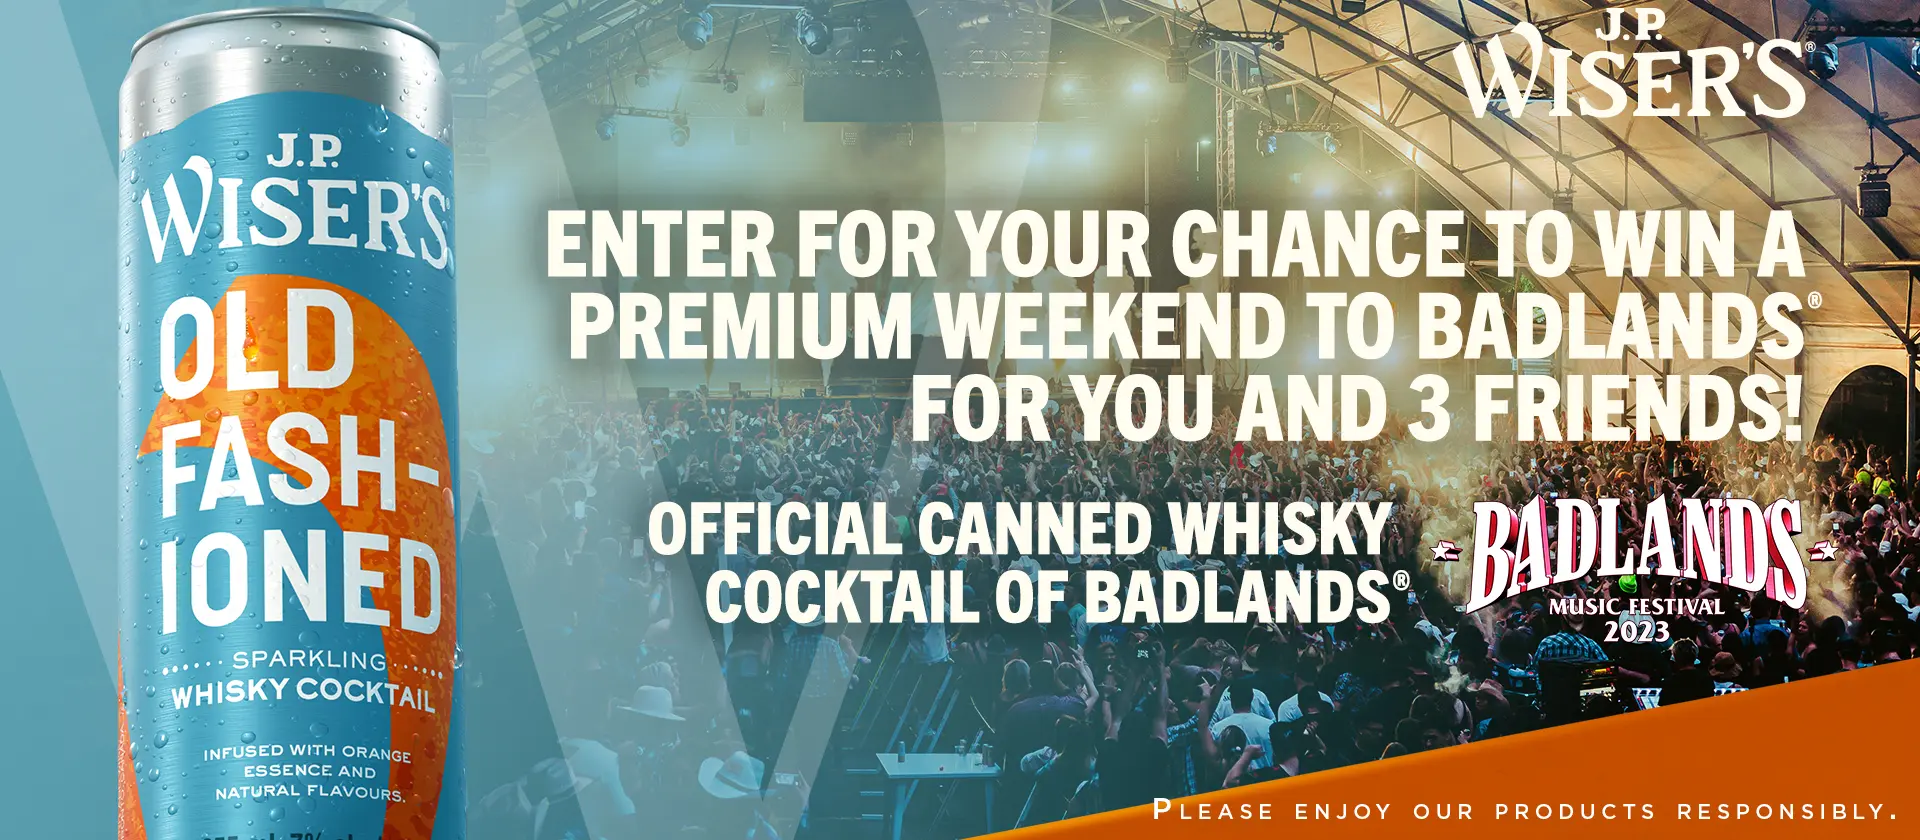 Enter for your chance to win a premium weekend to Badlands for you and 3 friends!